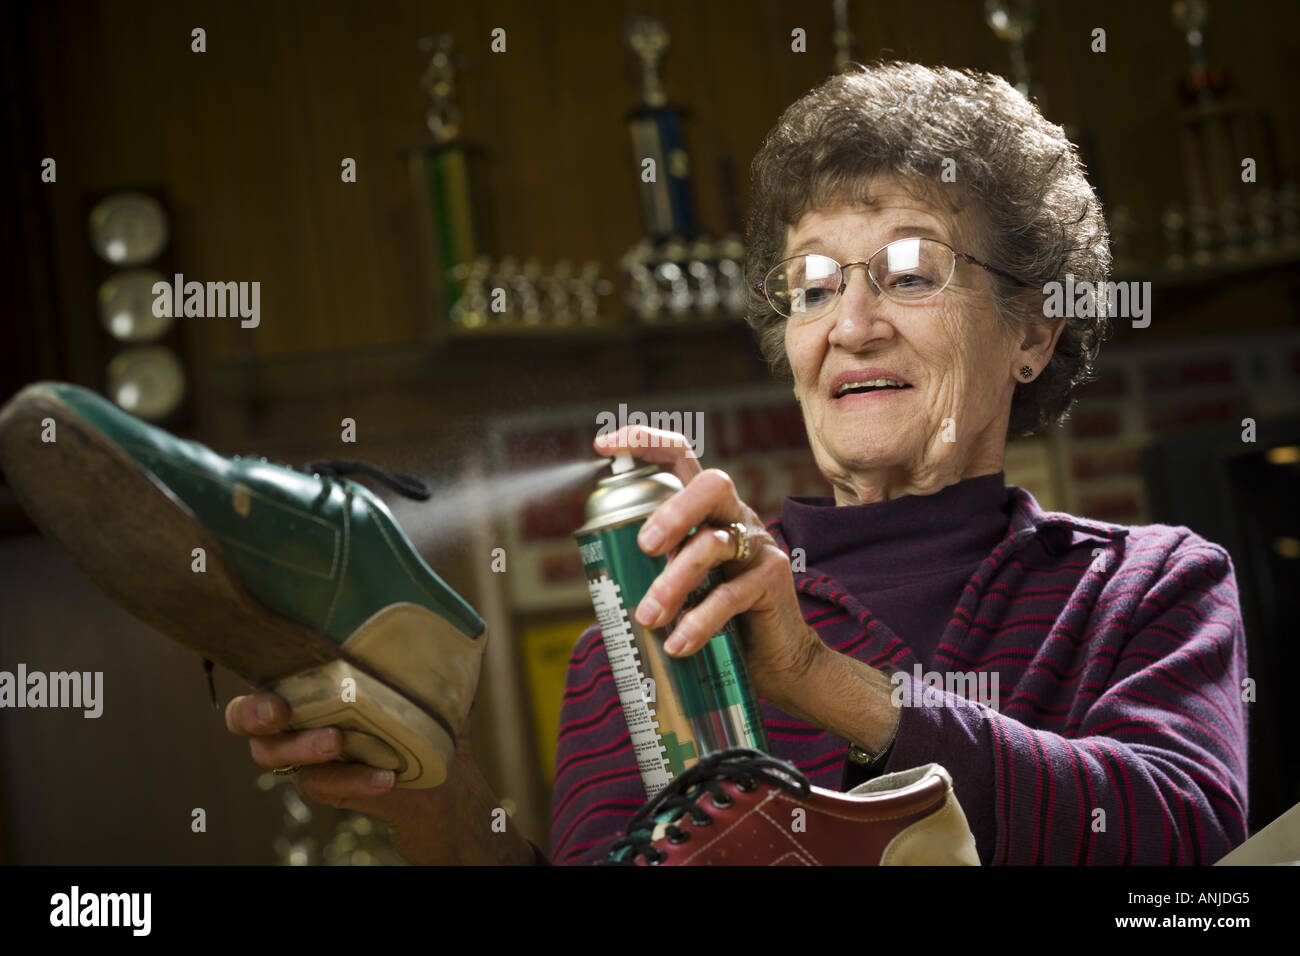 Close up of a senior woman spraying deoderant on a bowling shoe Stock Photo